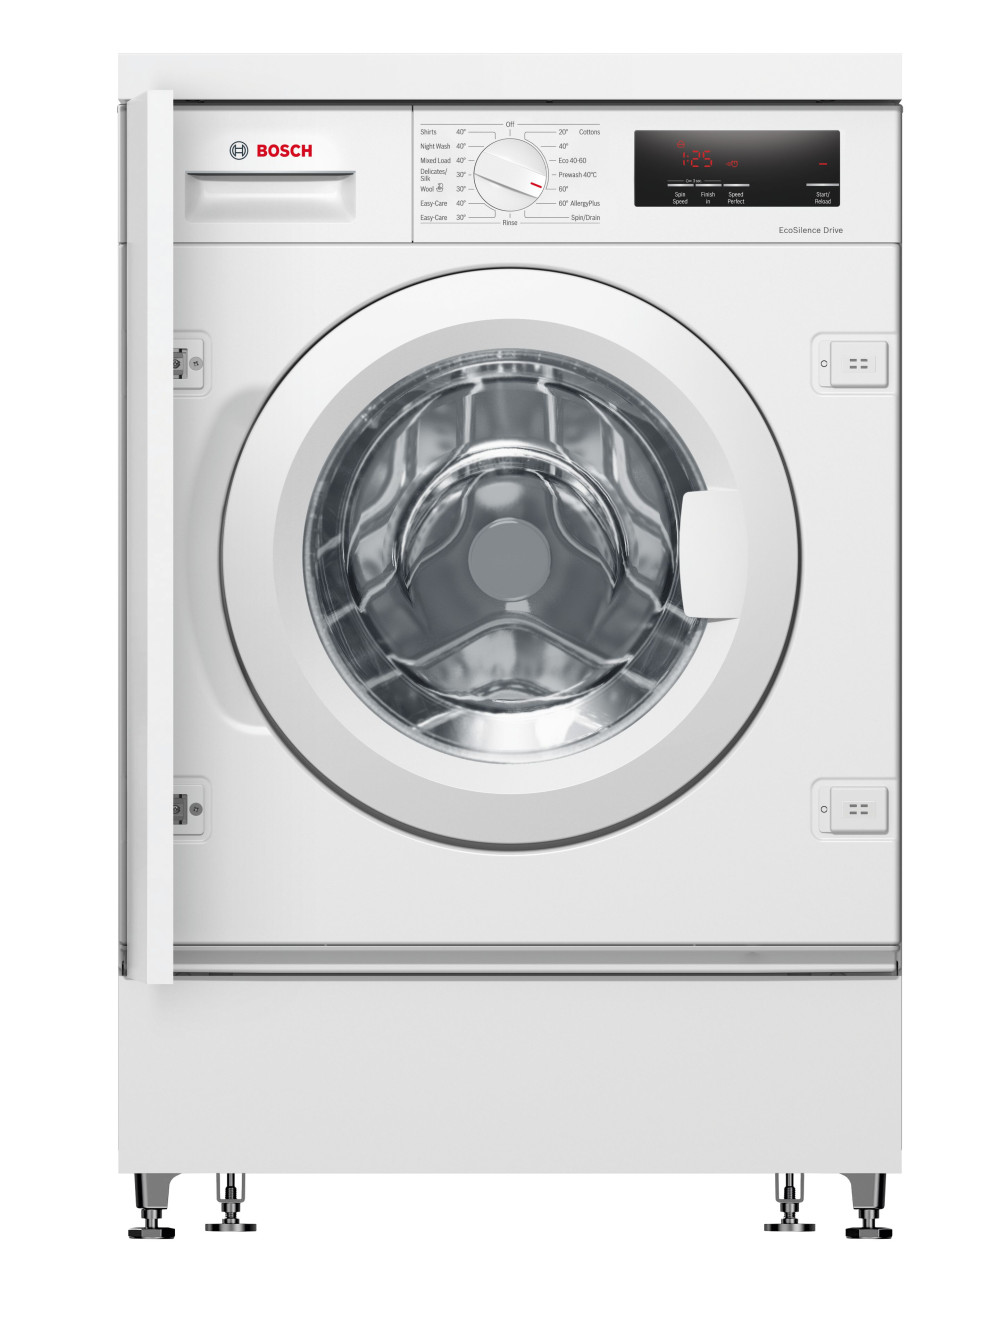 Bosch WIW28302GB Series 6 8kg Integrated Washing Machine featured image